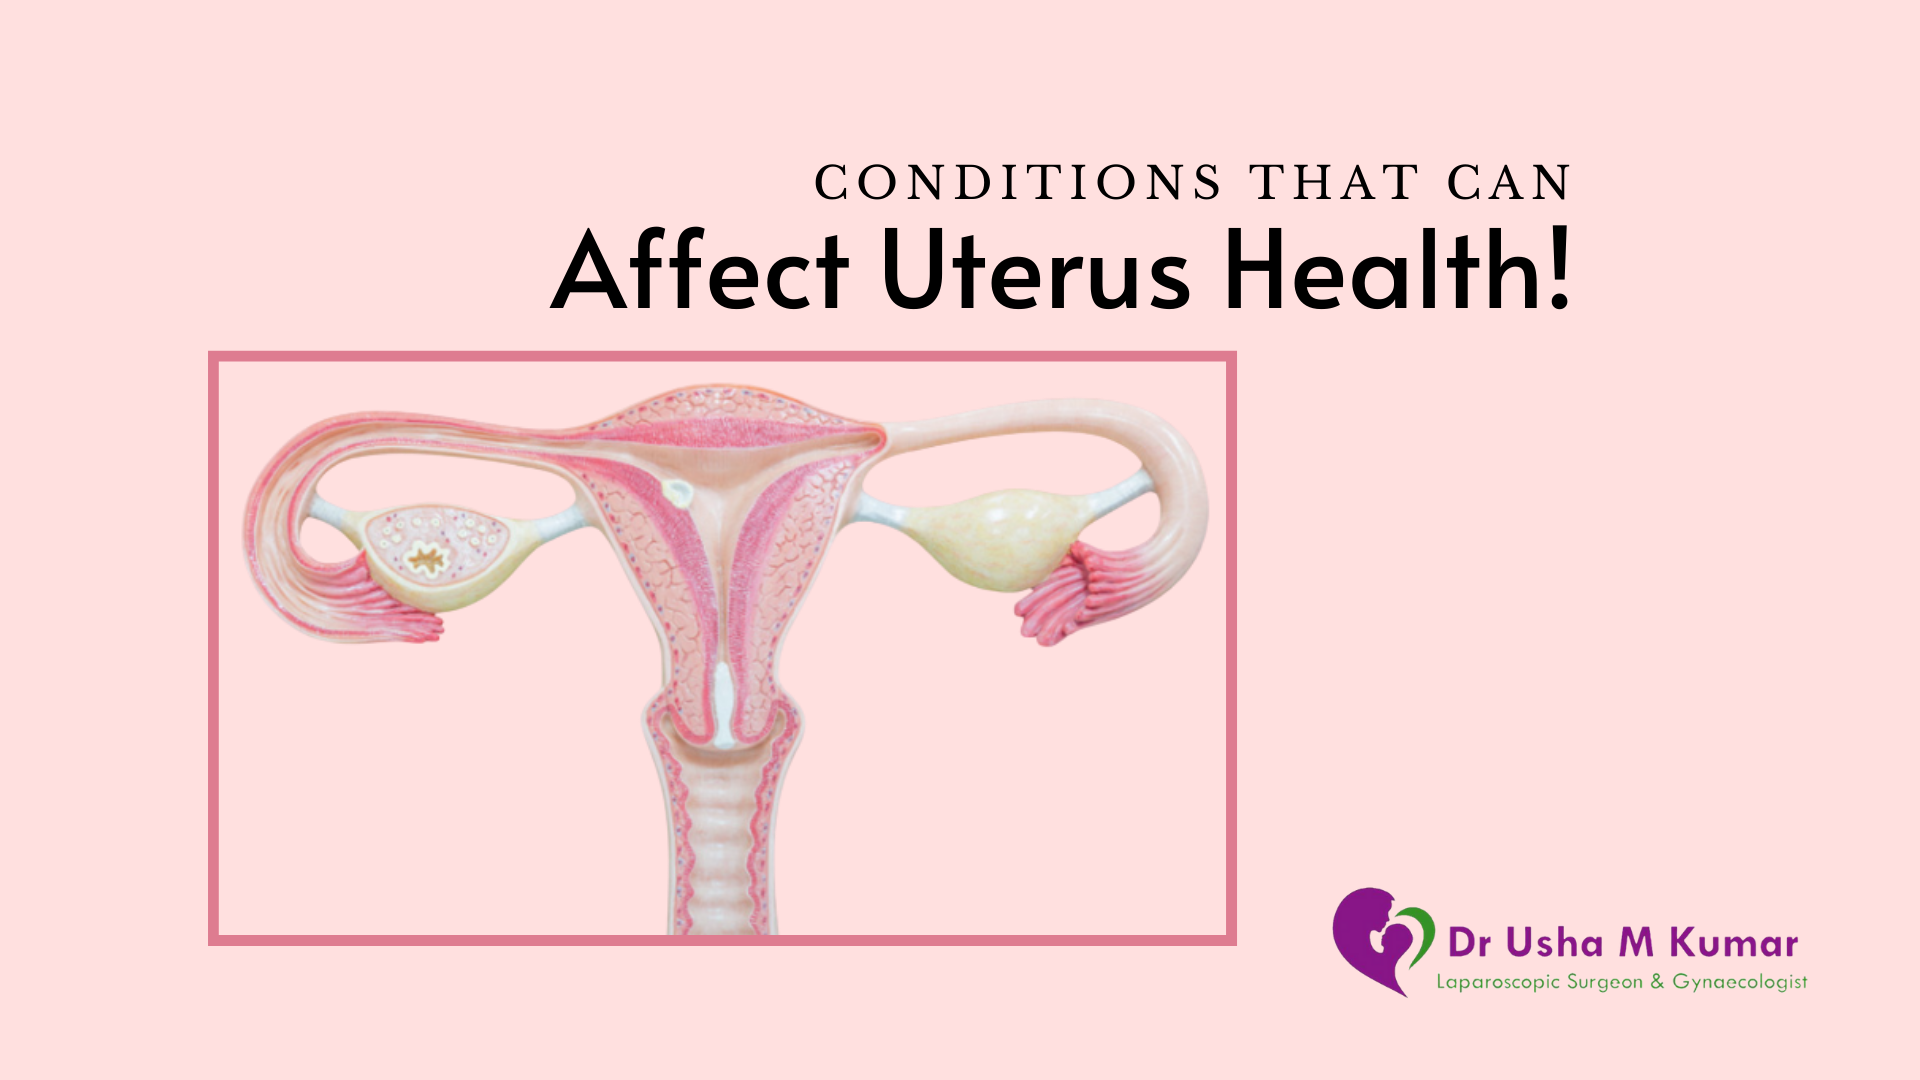 Conditions that affect Uterus Health